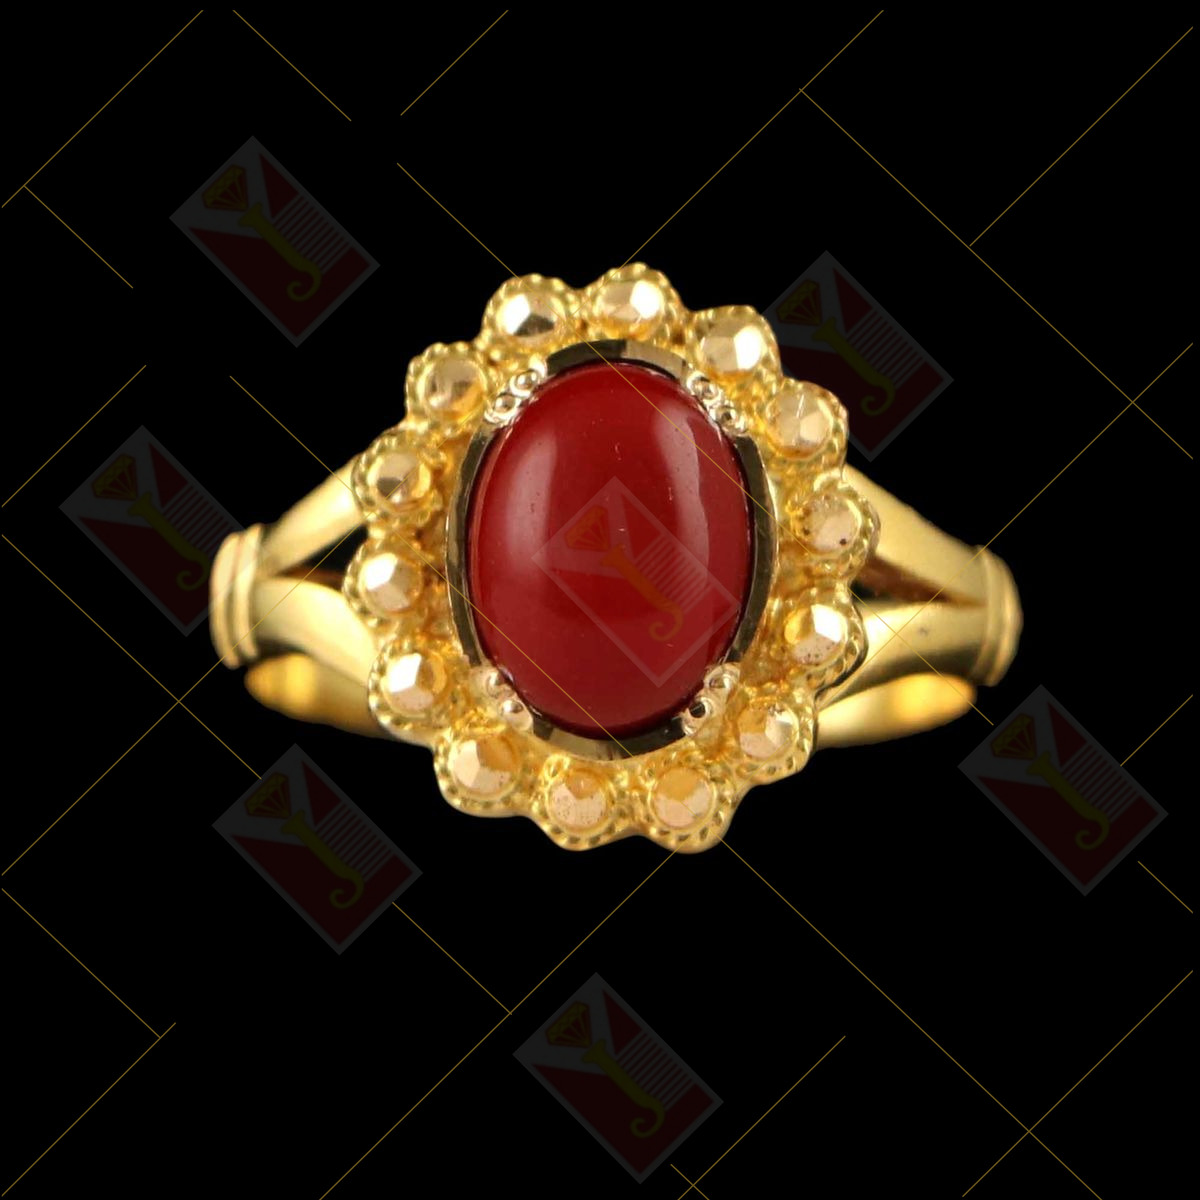 coral gold rings design with weight | coral birth stones in gold rings |pagadam  rings designs 916kdm - YouTube